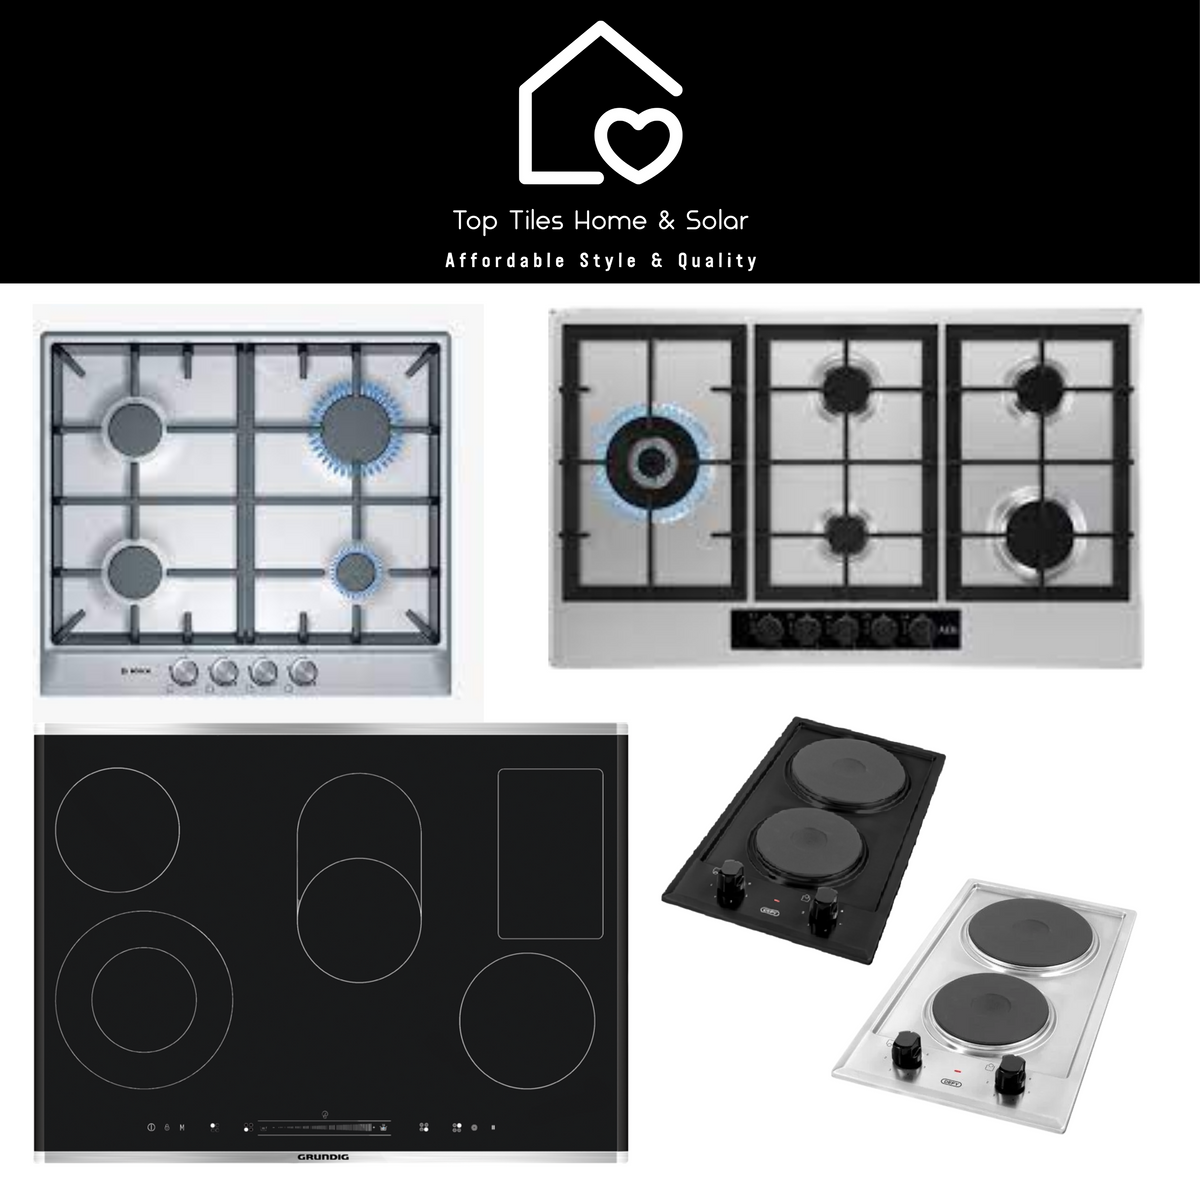 Grundig Touch Control Induction Domino Hob - Induction Domino Hob